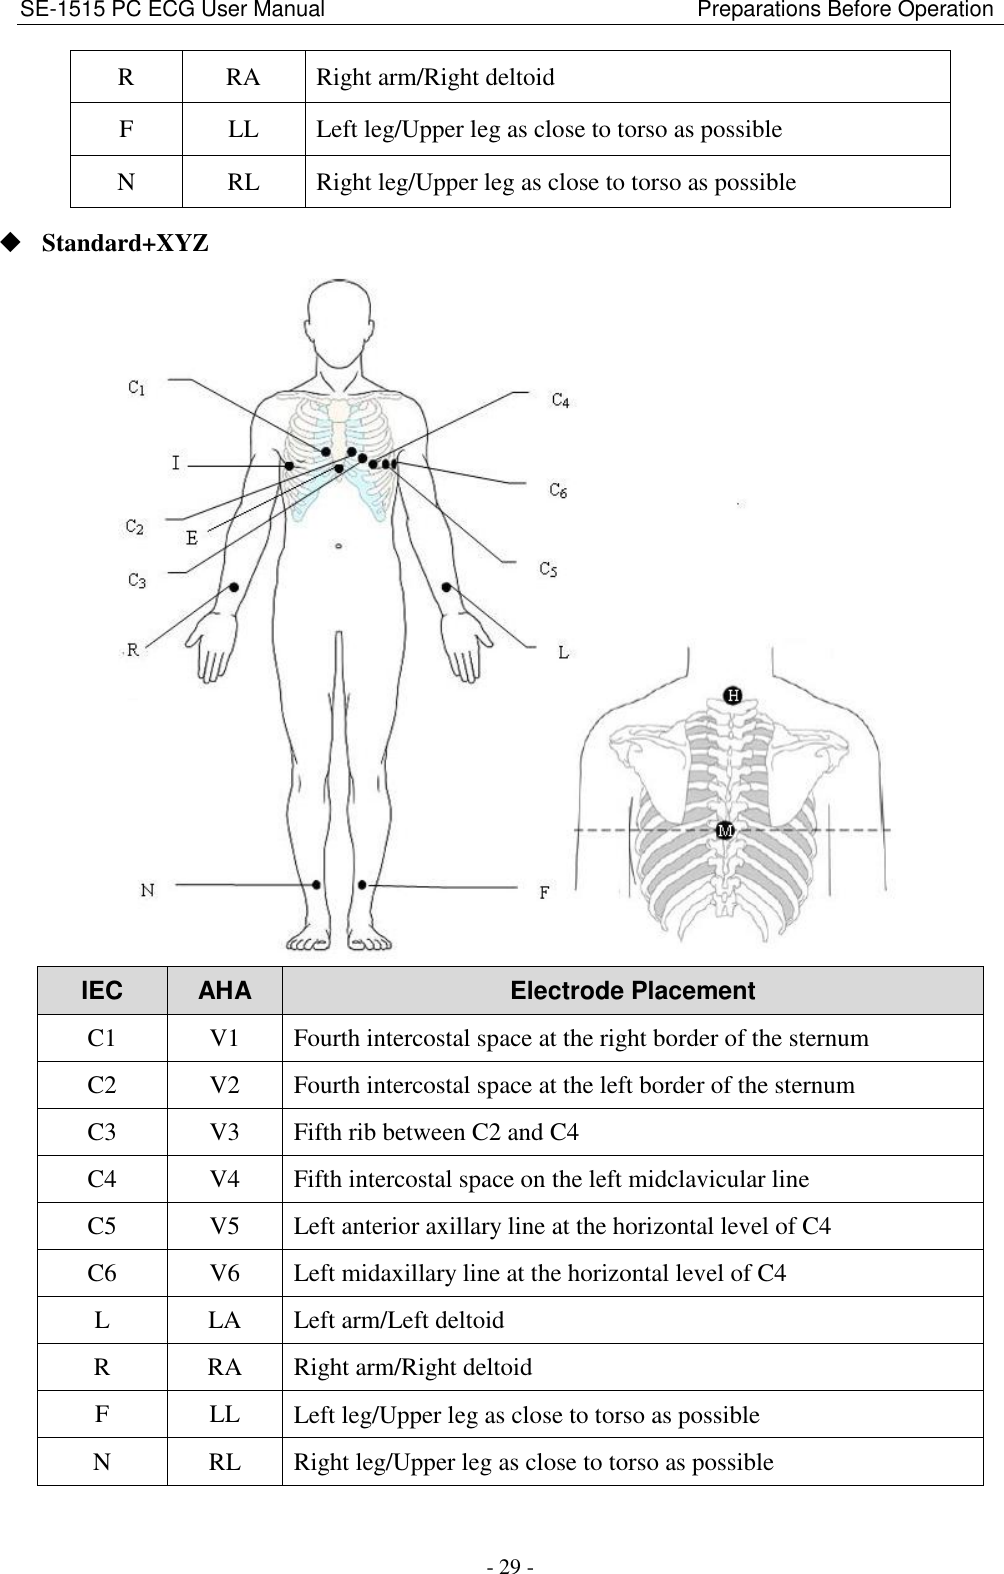 SE-1515 PC ECG User Manual                                                                    Preparations Before Operation - 29 - R RA Right arm/Right deltoid F LL Left leg/Upper leg as close to torso as possible N RL Right leg/Upper leg as close to torso as possible  Standard+XYZ    IEC AHA Electrode Placement C1 V1 Fourth intercostal space at the right border of the sternum C2 V2 Fourth intercostal space at the left border of the sternum C3 V3 Fifth rib between C2 and C4 C4 V4 Fifth intercostal space on the left midclavicular line C5 V5 Left anterior axillary line at the horizontal level of C4 C6 V6 Left midaxillary line at the horizontal level of C4 L LA Left arm/Left deltoid R RA Right arm/Right deltoid F LL Left leg/Upper leg as close to torso as possible N RL Right leg/Upper leg as close to torso as possible 